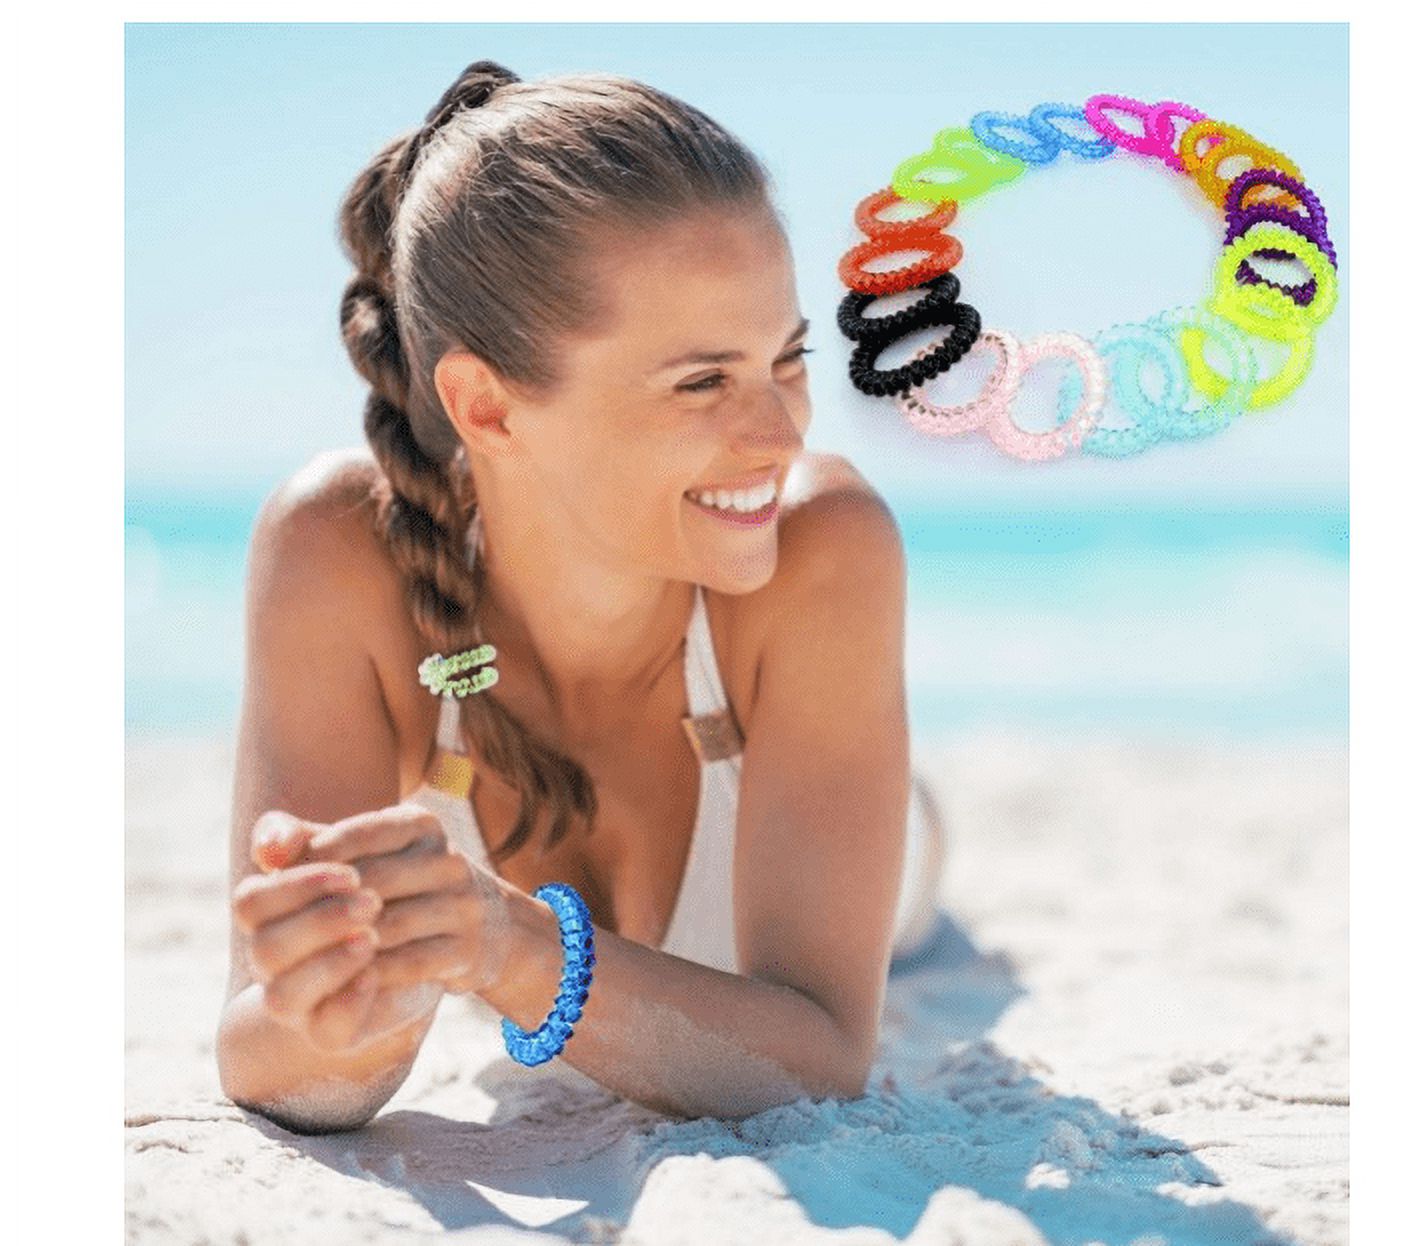 Spiral Hair Ties,50 Pcs Colorful No Crease Hair Ties,Candy Color Phone Cord Hair Ties Coils,Spiral Bracelets,Elastic Coil Hair Ties Ponytail Holders Hair Accessories for Women Girls All Hair Styles - image 4 of 10